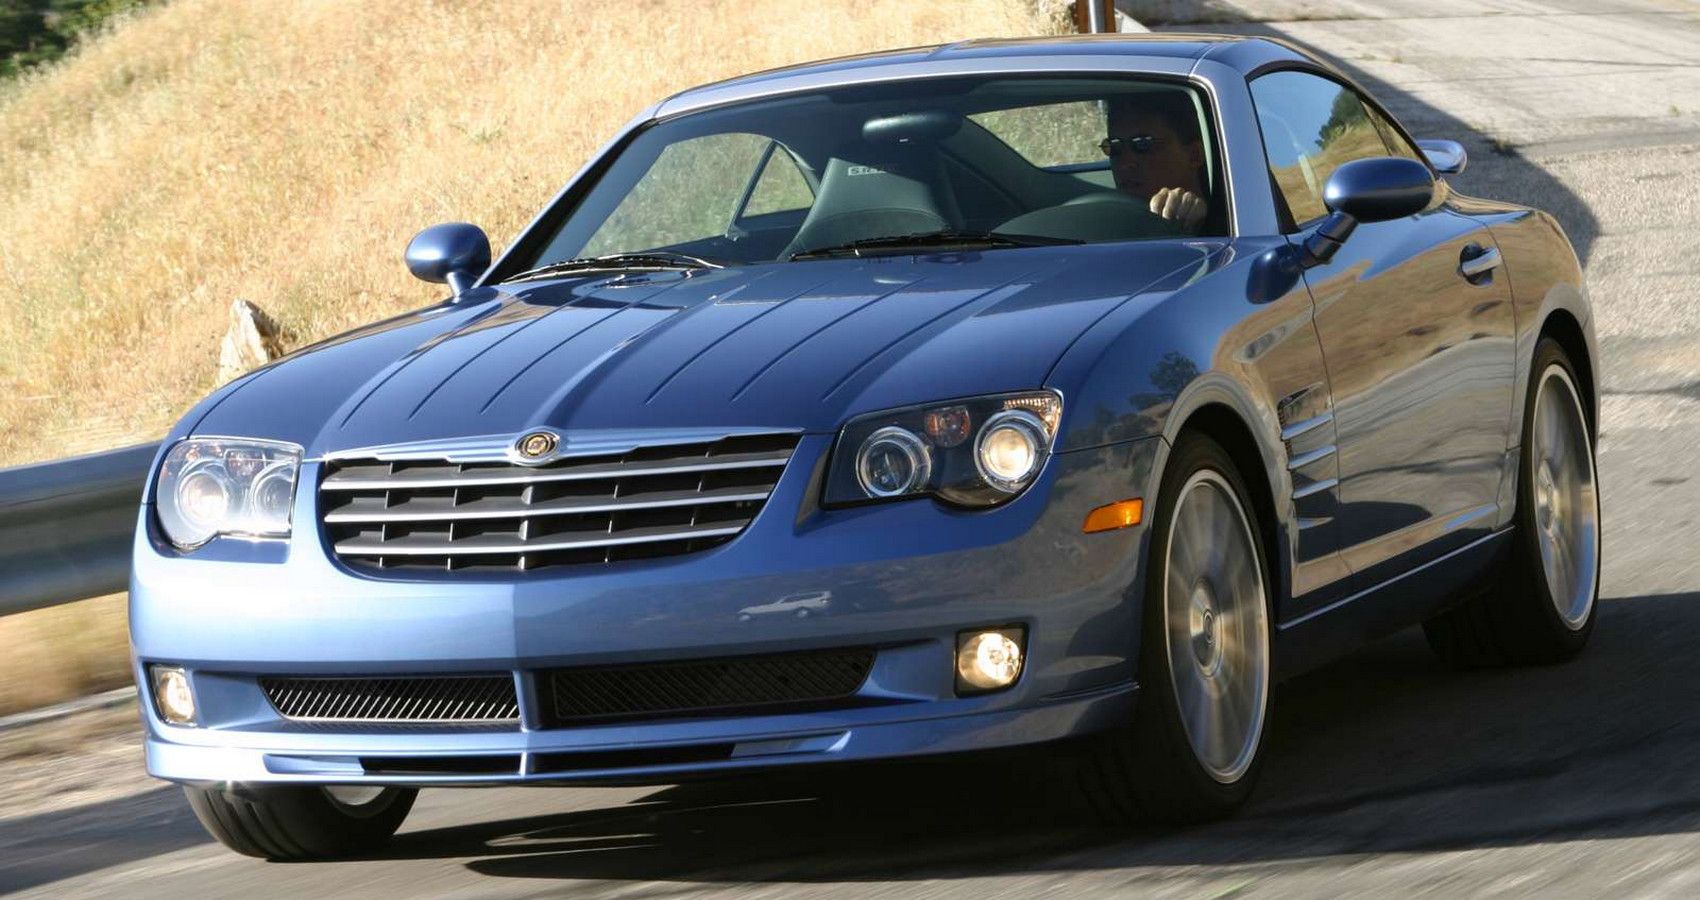 Find Out Why The Chrysler Crossfire SRT-6 Doesn't Deserve All The Hate